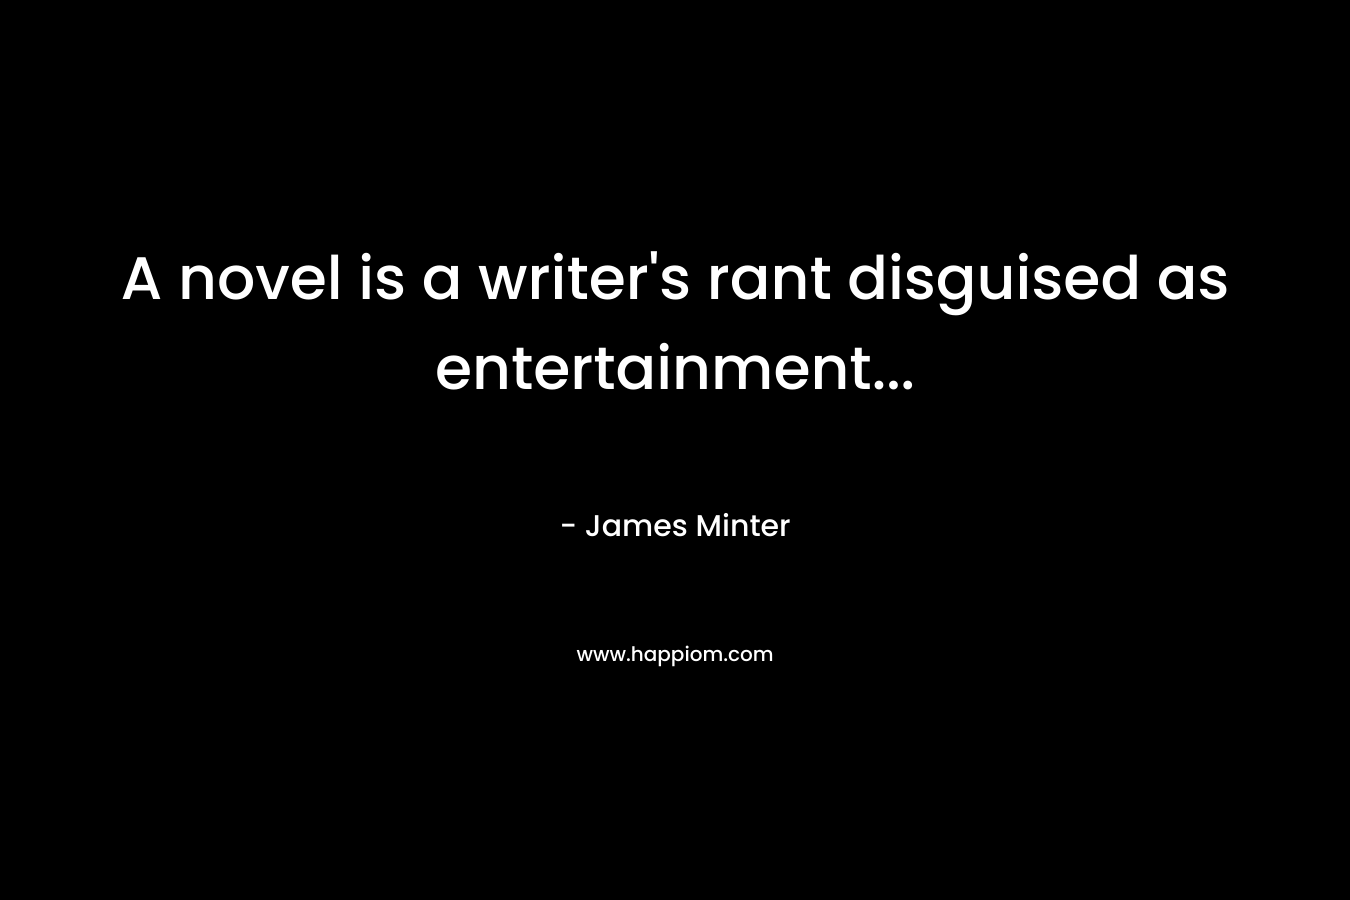 A novel is a writer's rant disguised as entertainment...